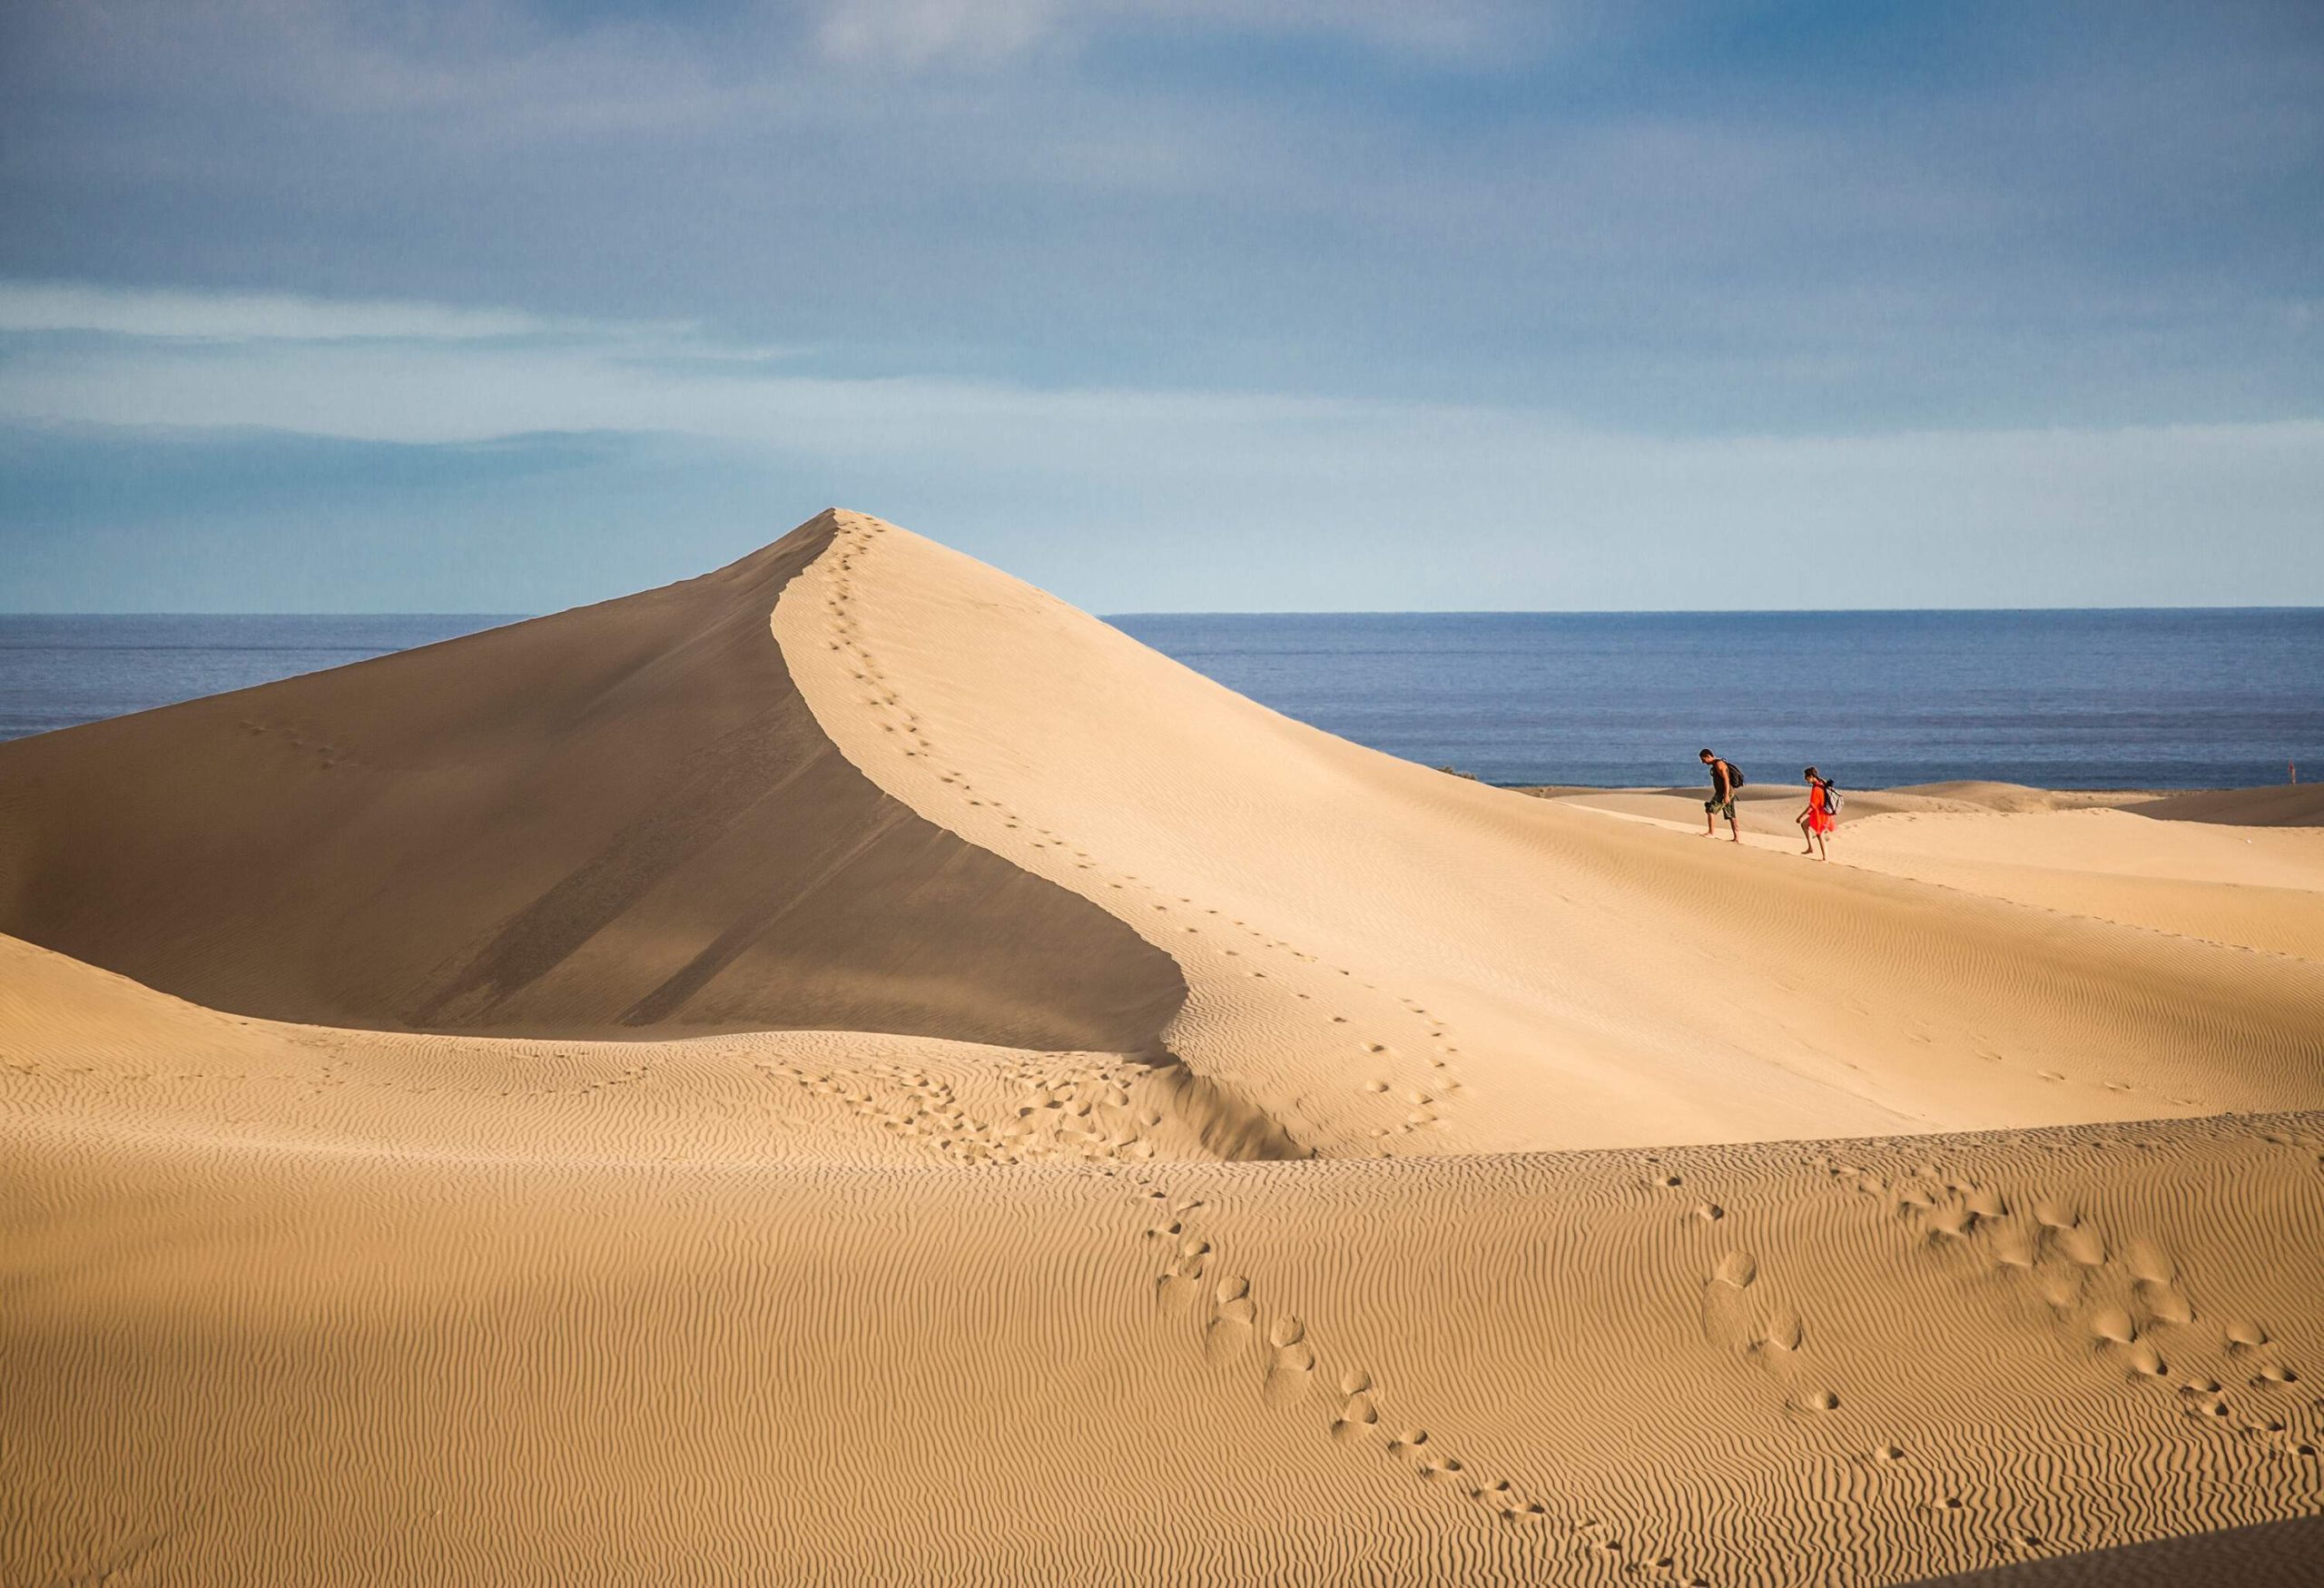 Under an overcast sky, two people are strolling down a sand dune adjacent to the sea.